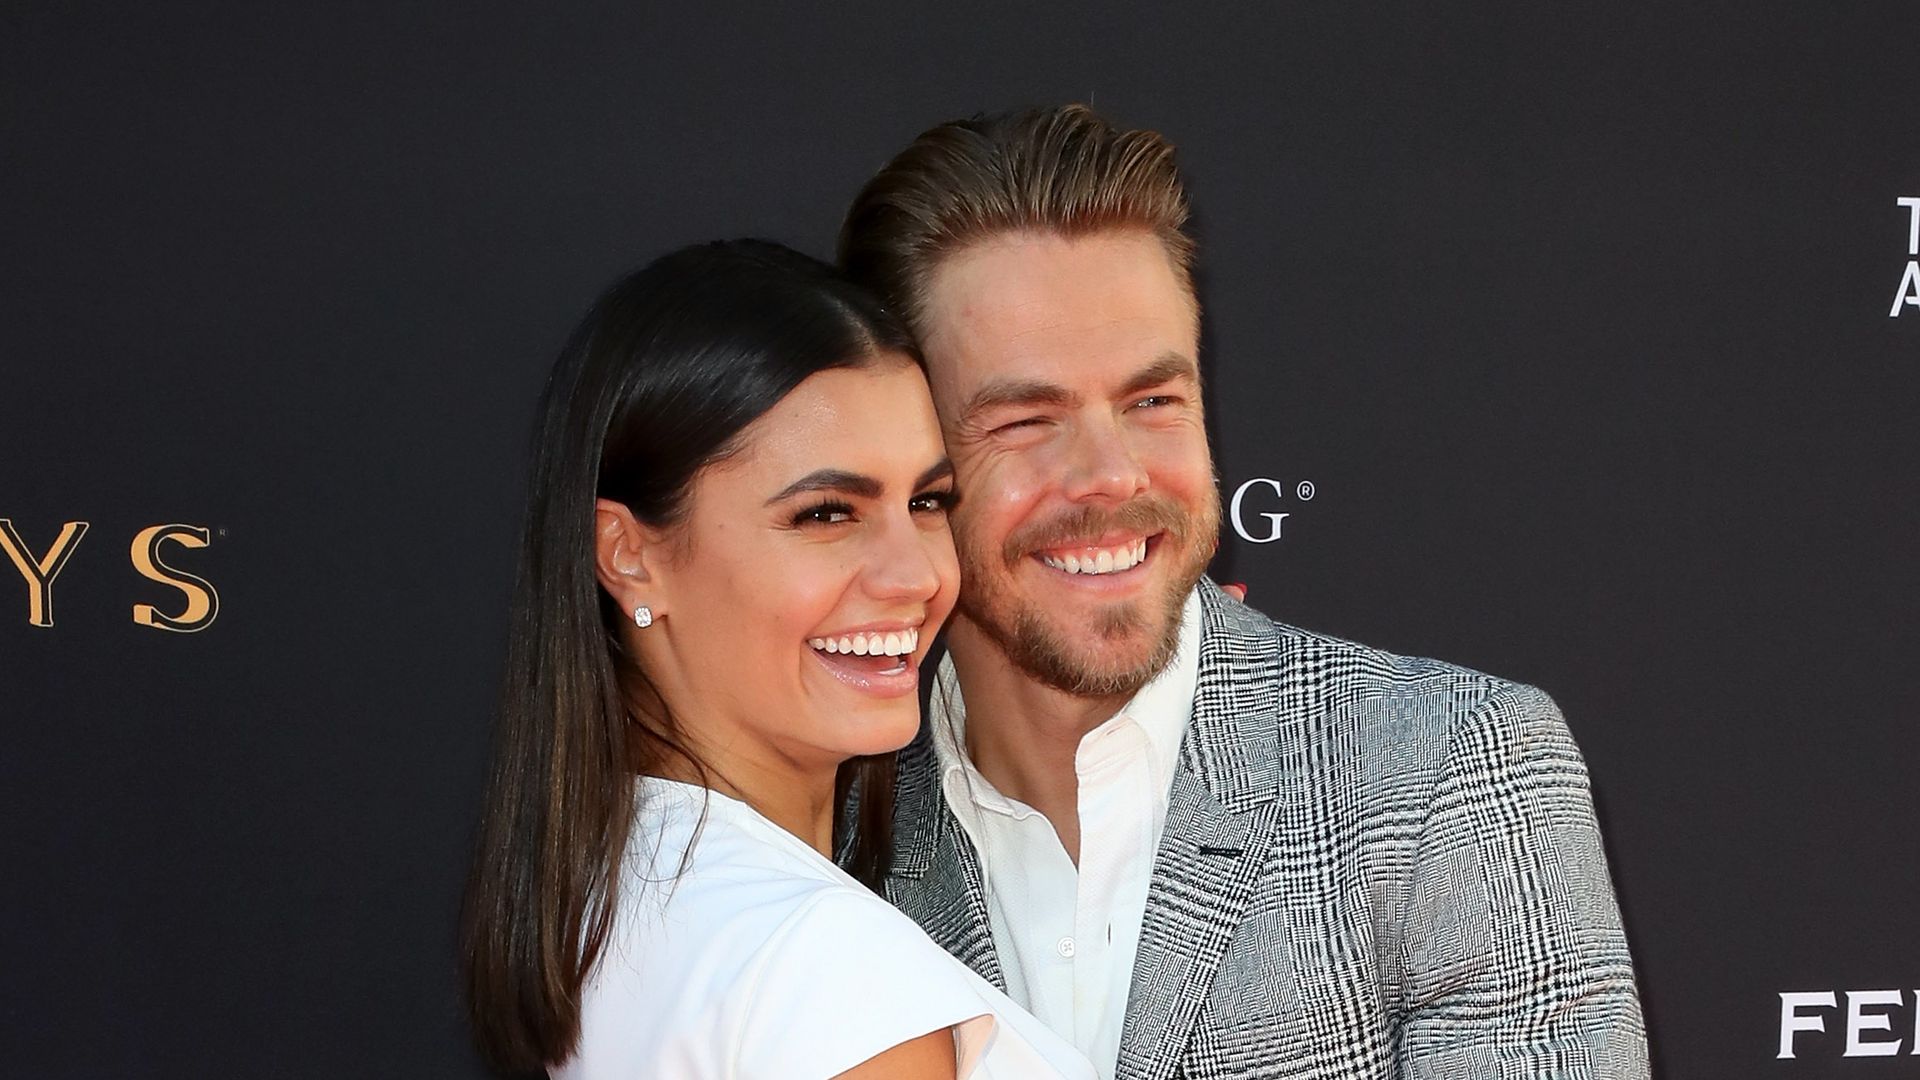 Hayley Erbert (L) and dancer/TV personality Derek Hough attend the Television Academy's Choreography Peer Group Celebration at Saban Media Center on August 27, 2017 in North Hollywood, California